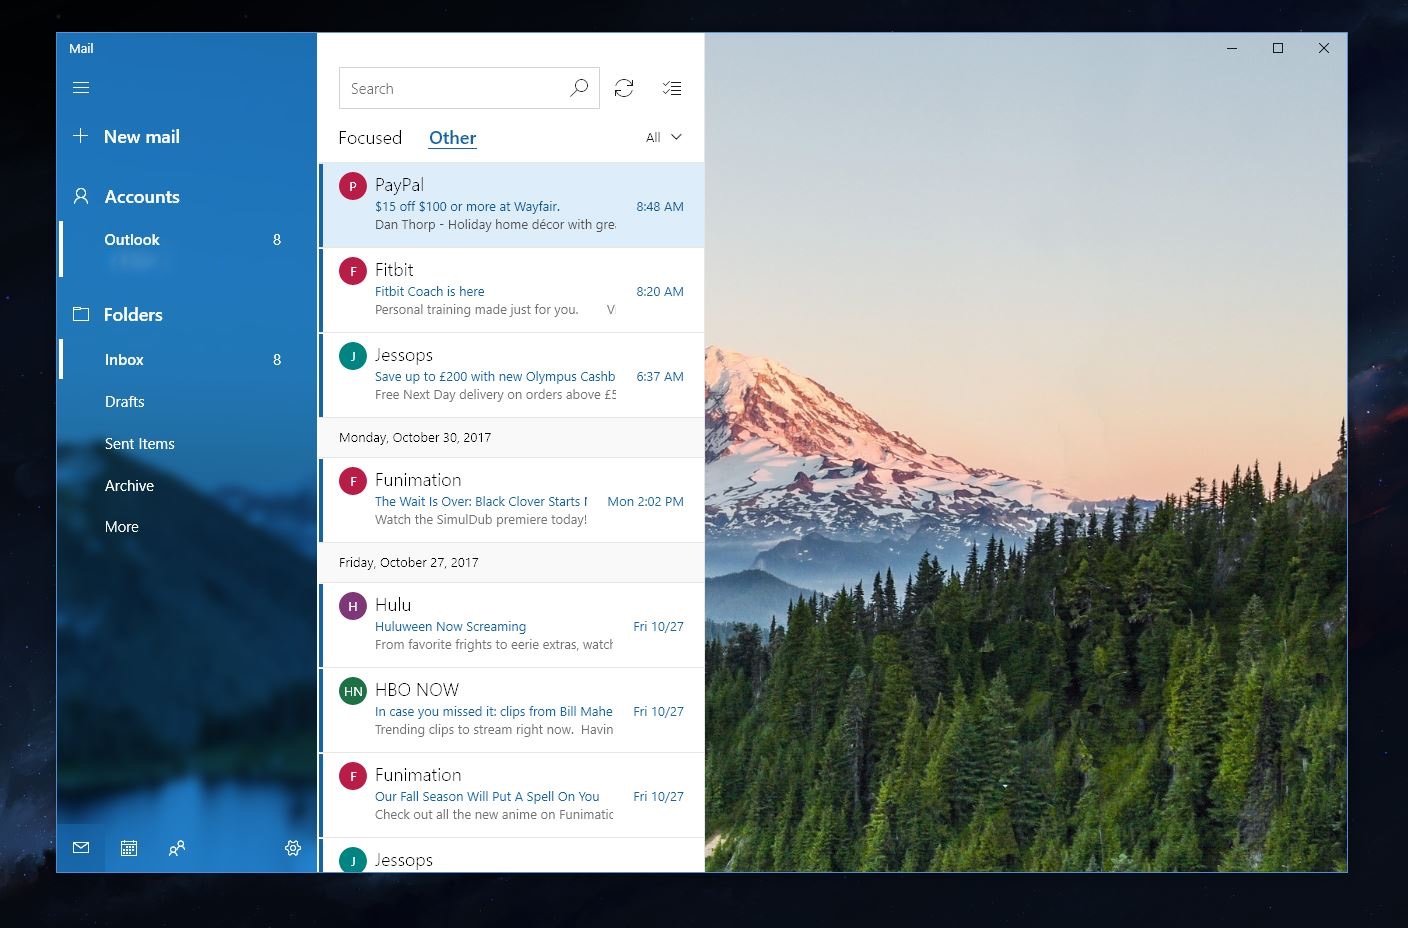 Microsoft starts testing ads in the Windows 10 Mail app